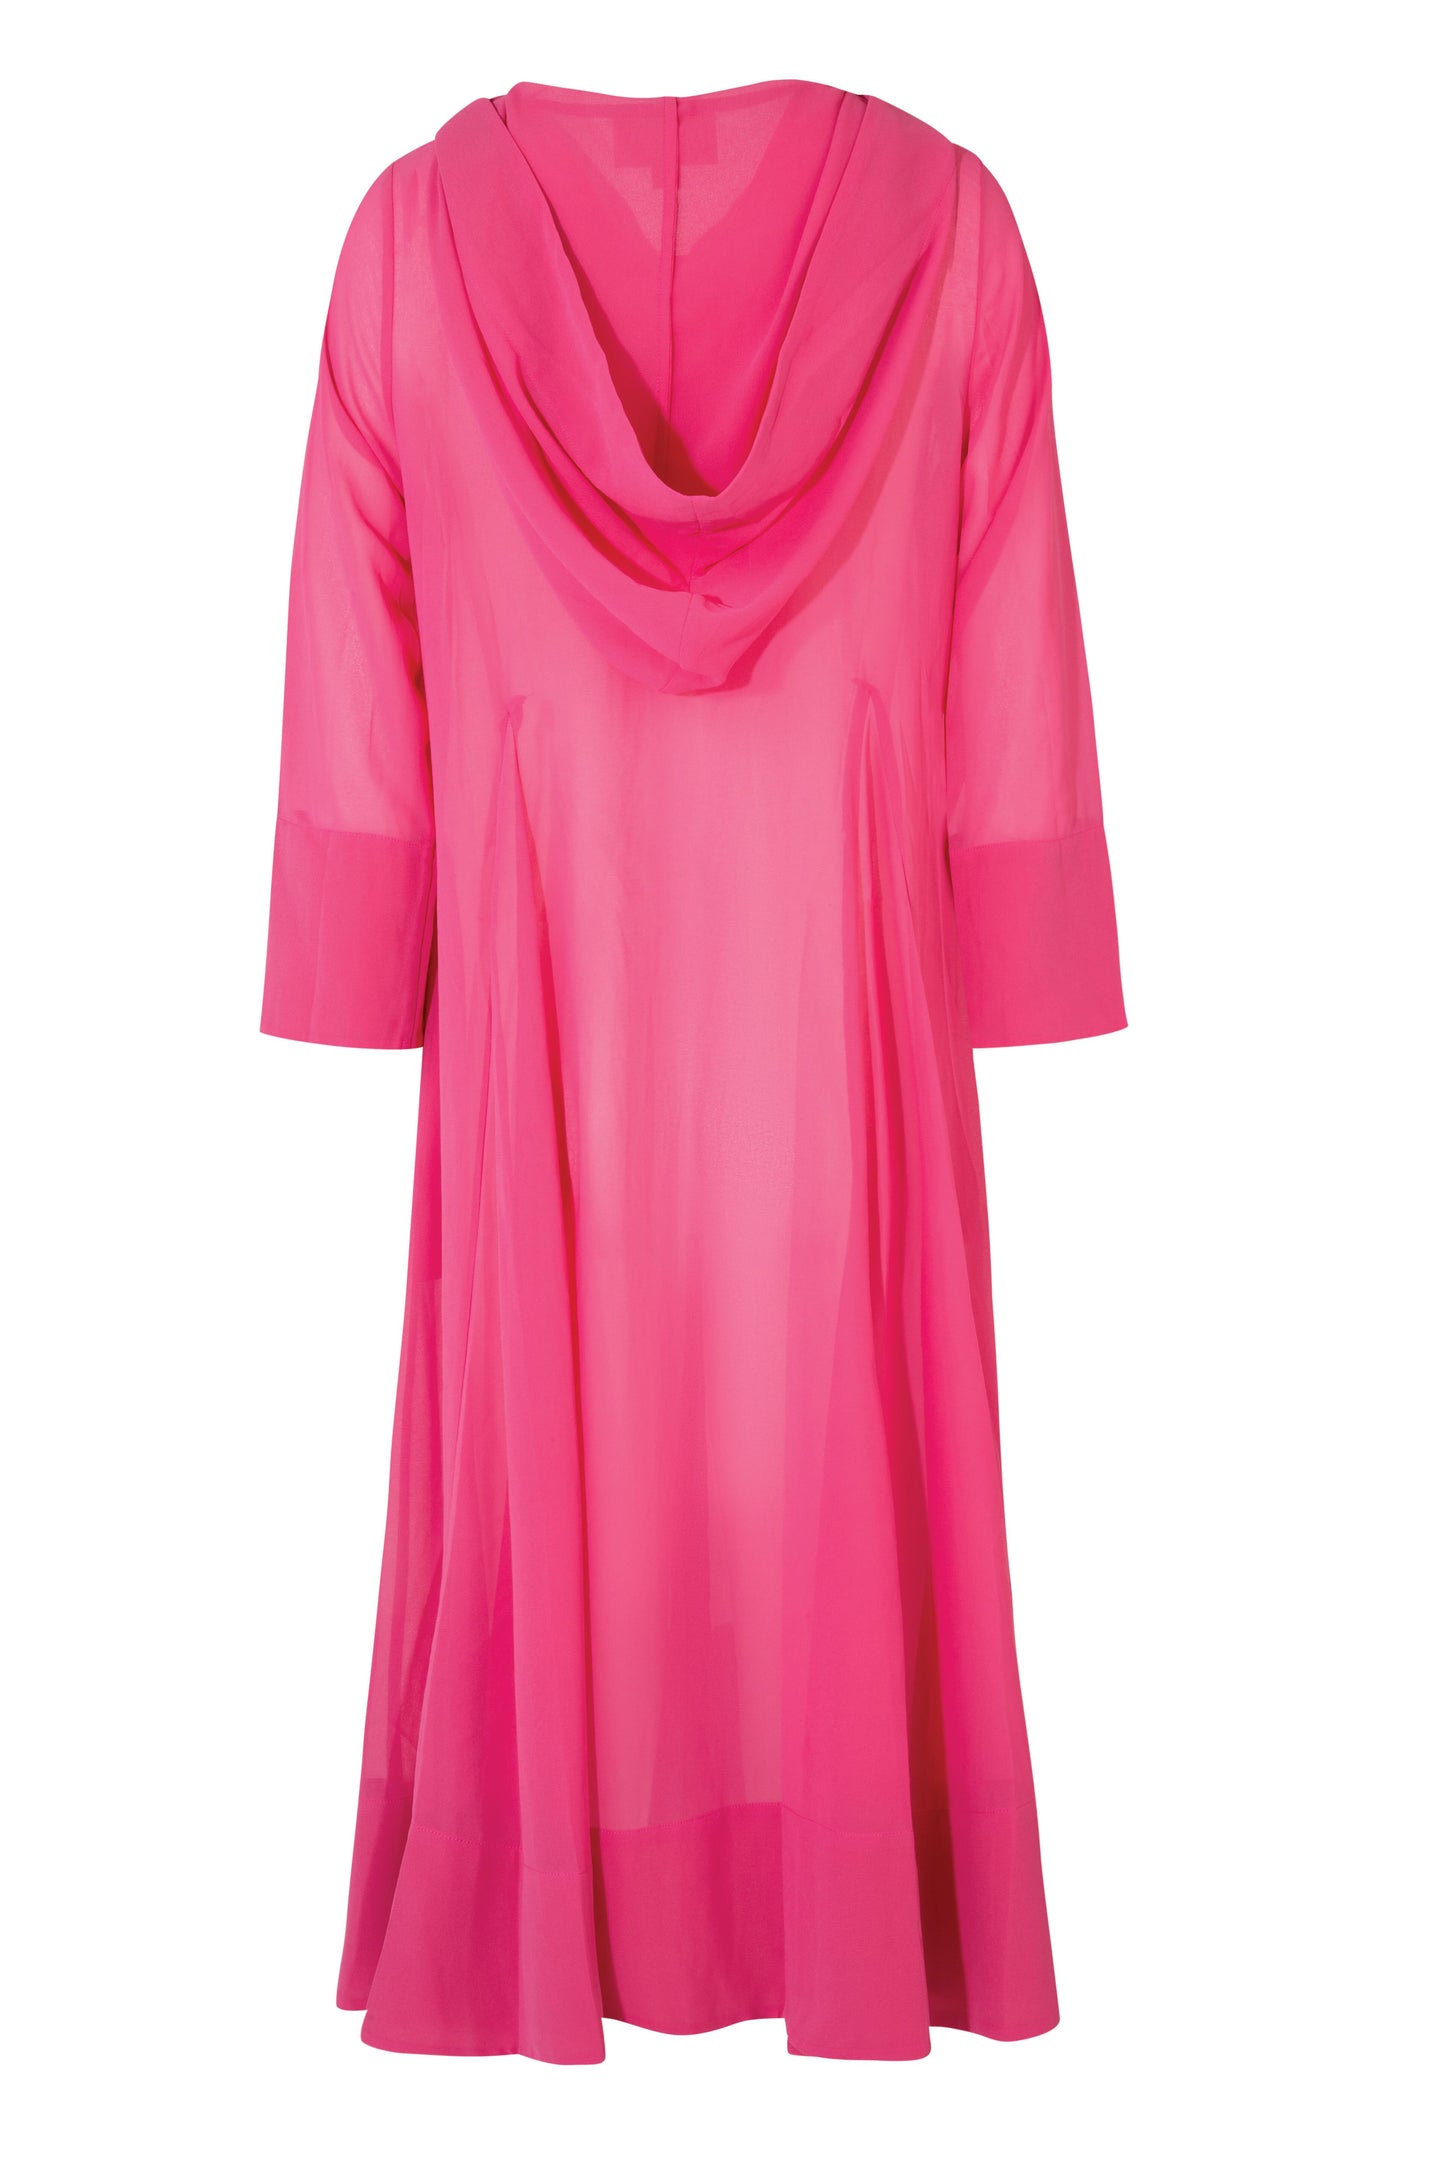 CURATE UNDERCOVER DRESS - PINK - THE VOGUE STORE